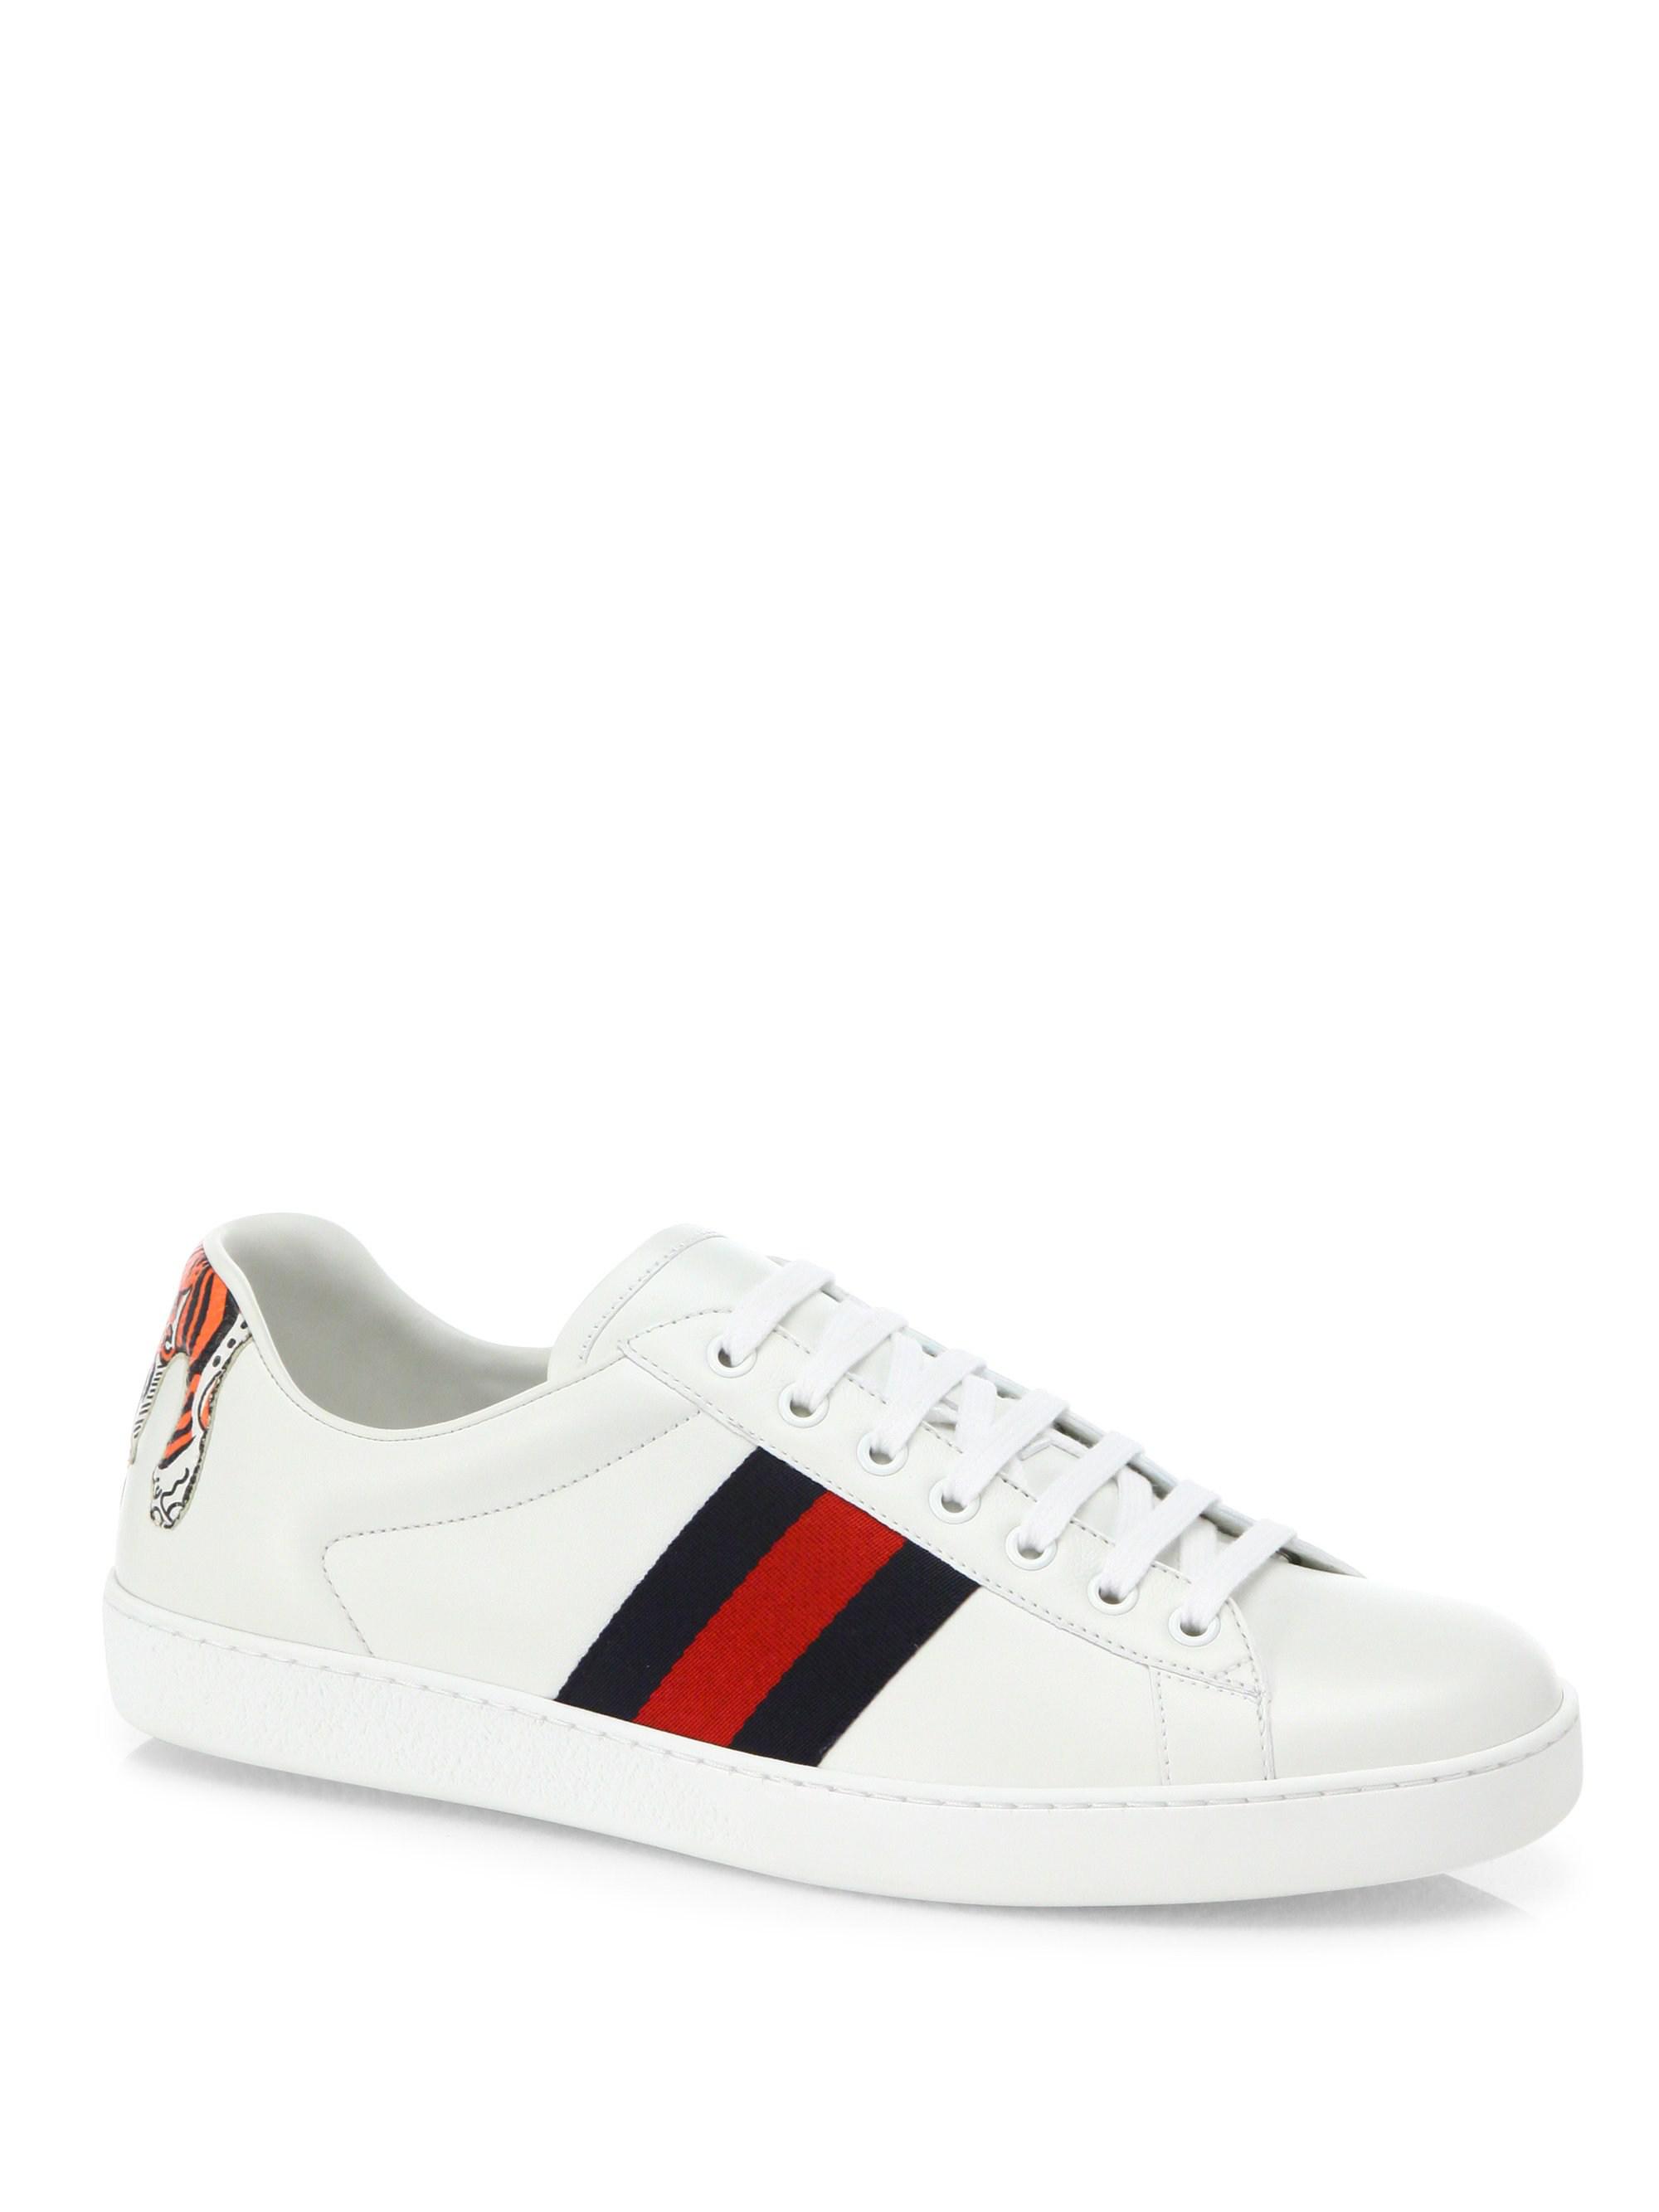 Gucci Leather New Ace Low-top Sneakers With Tiger in White for Men - Lyst